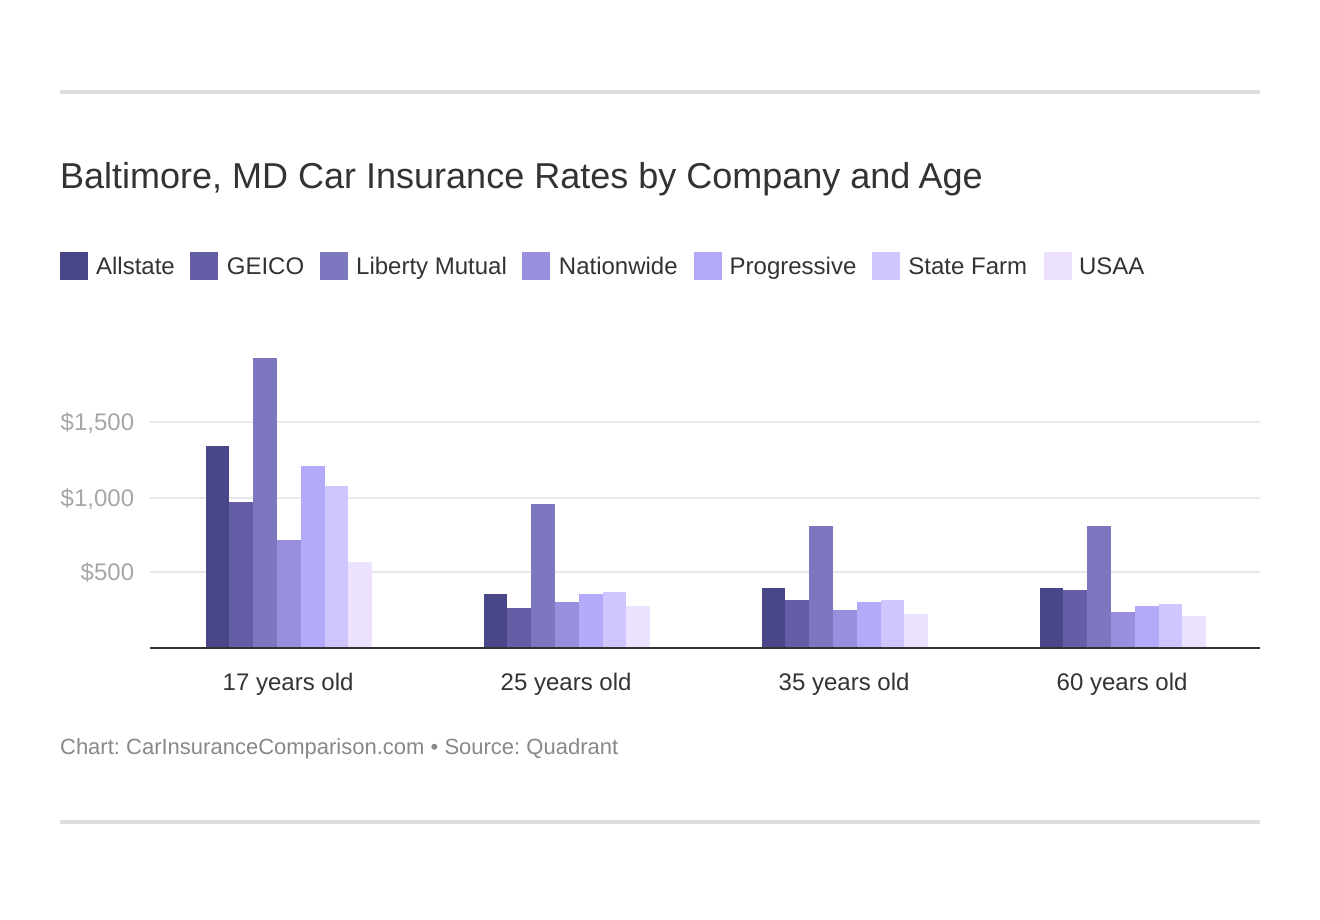 Baltimore, MD Car Insurance Rates by Company and Age